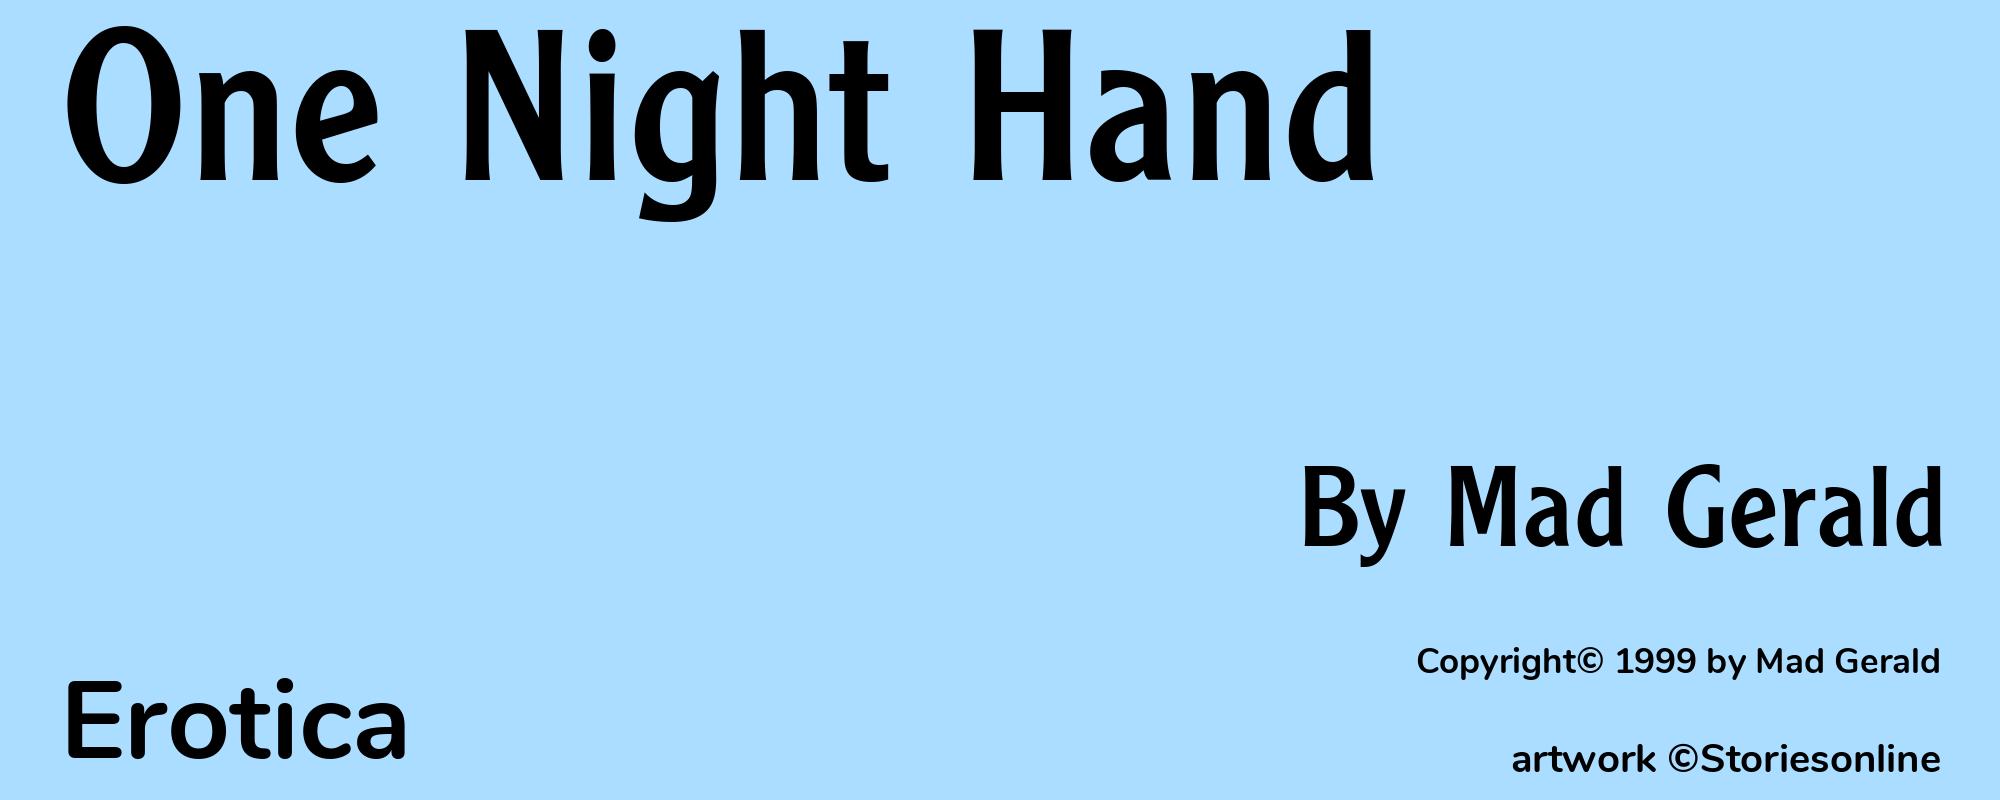 One Night Hand - Cover